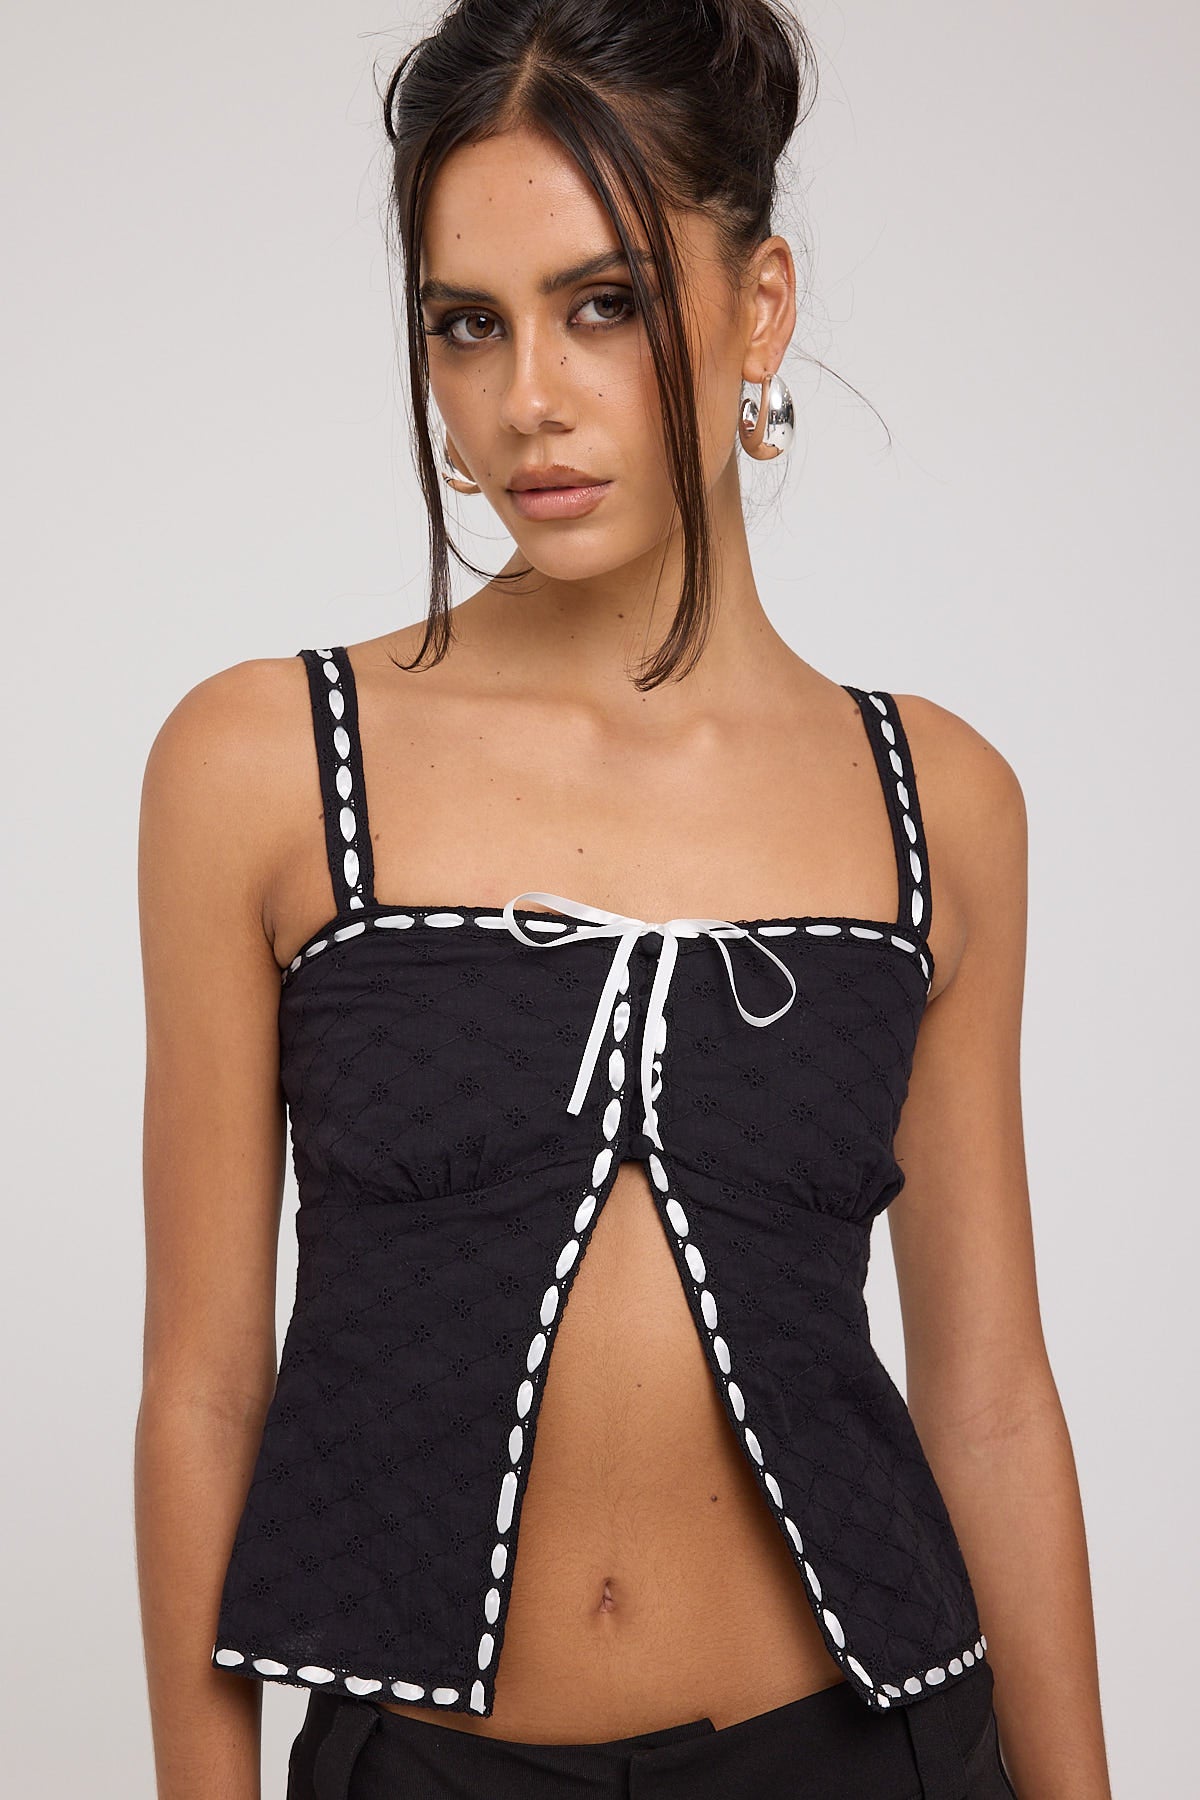 Buy Blue/Black Scenic Print Lace Trim Cami Top from Next Luxembourg